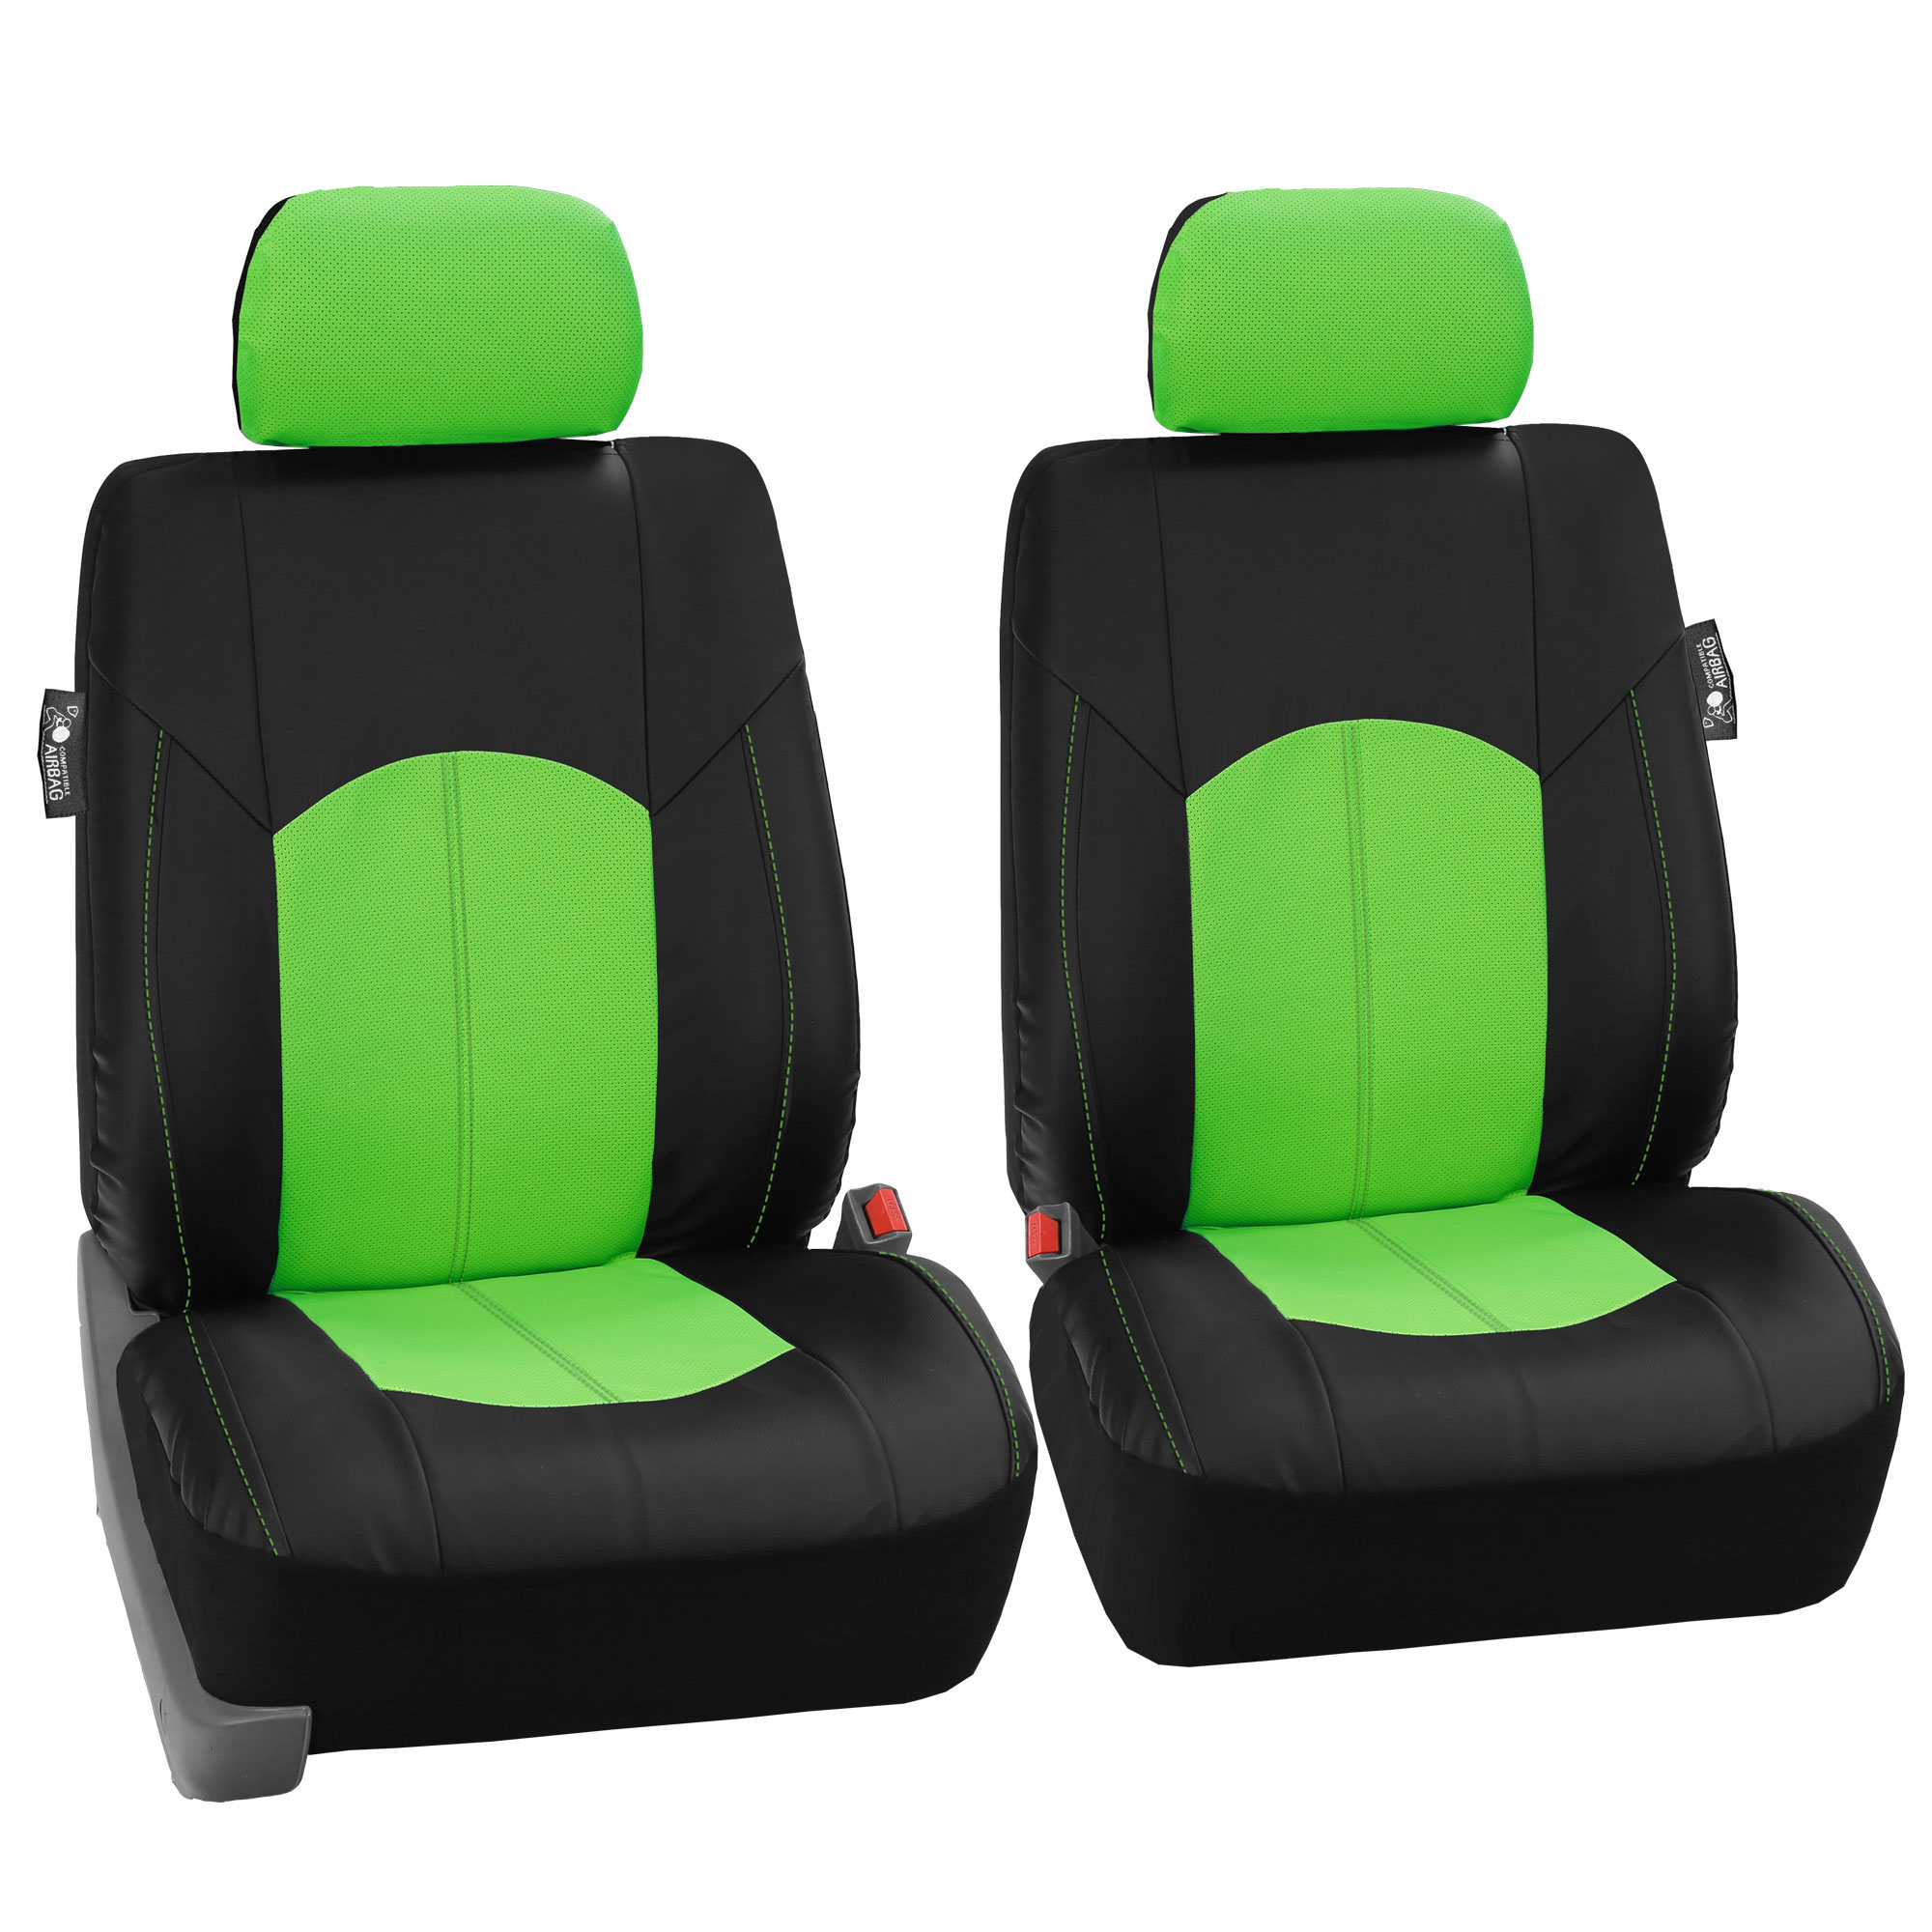 FH Group, Green Black Deluxe Leather Seat Covers Full Set w/ Free Air Freshener, Airbag Compatible / Split Bench Covers - image 5 of 10